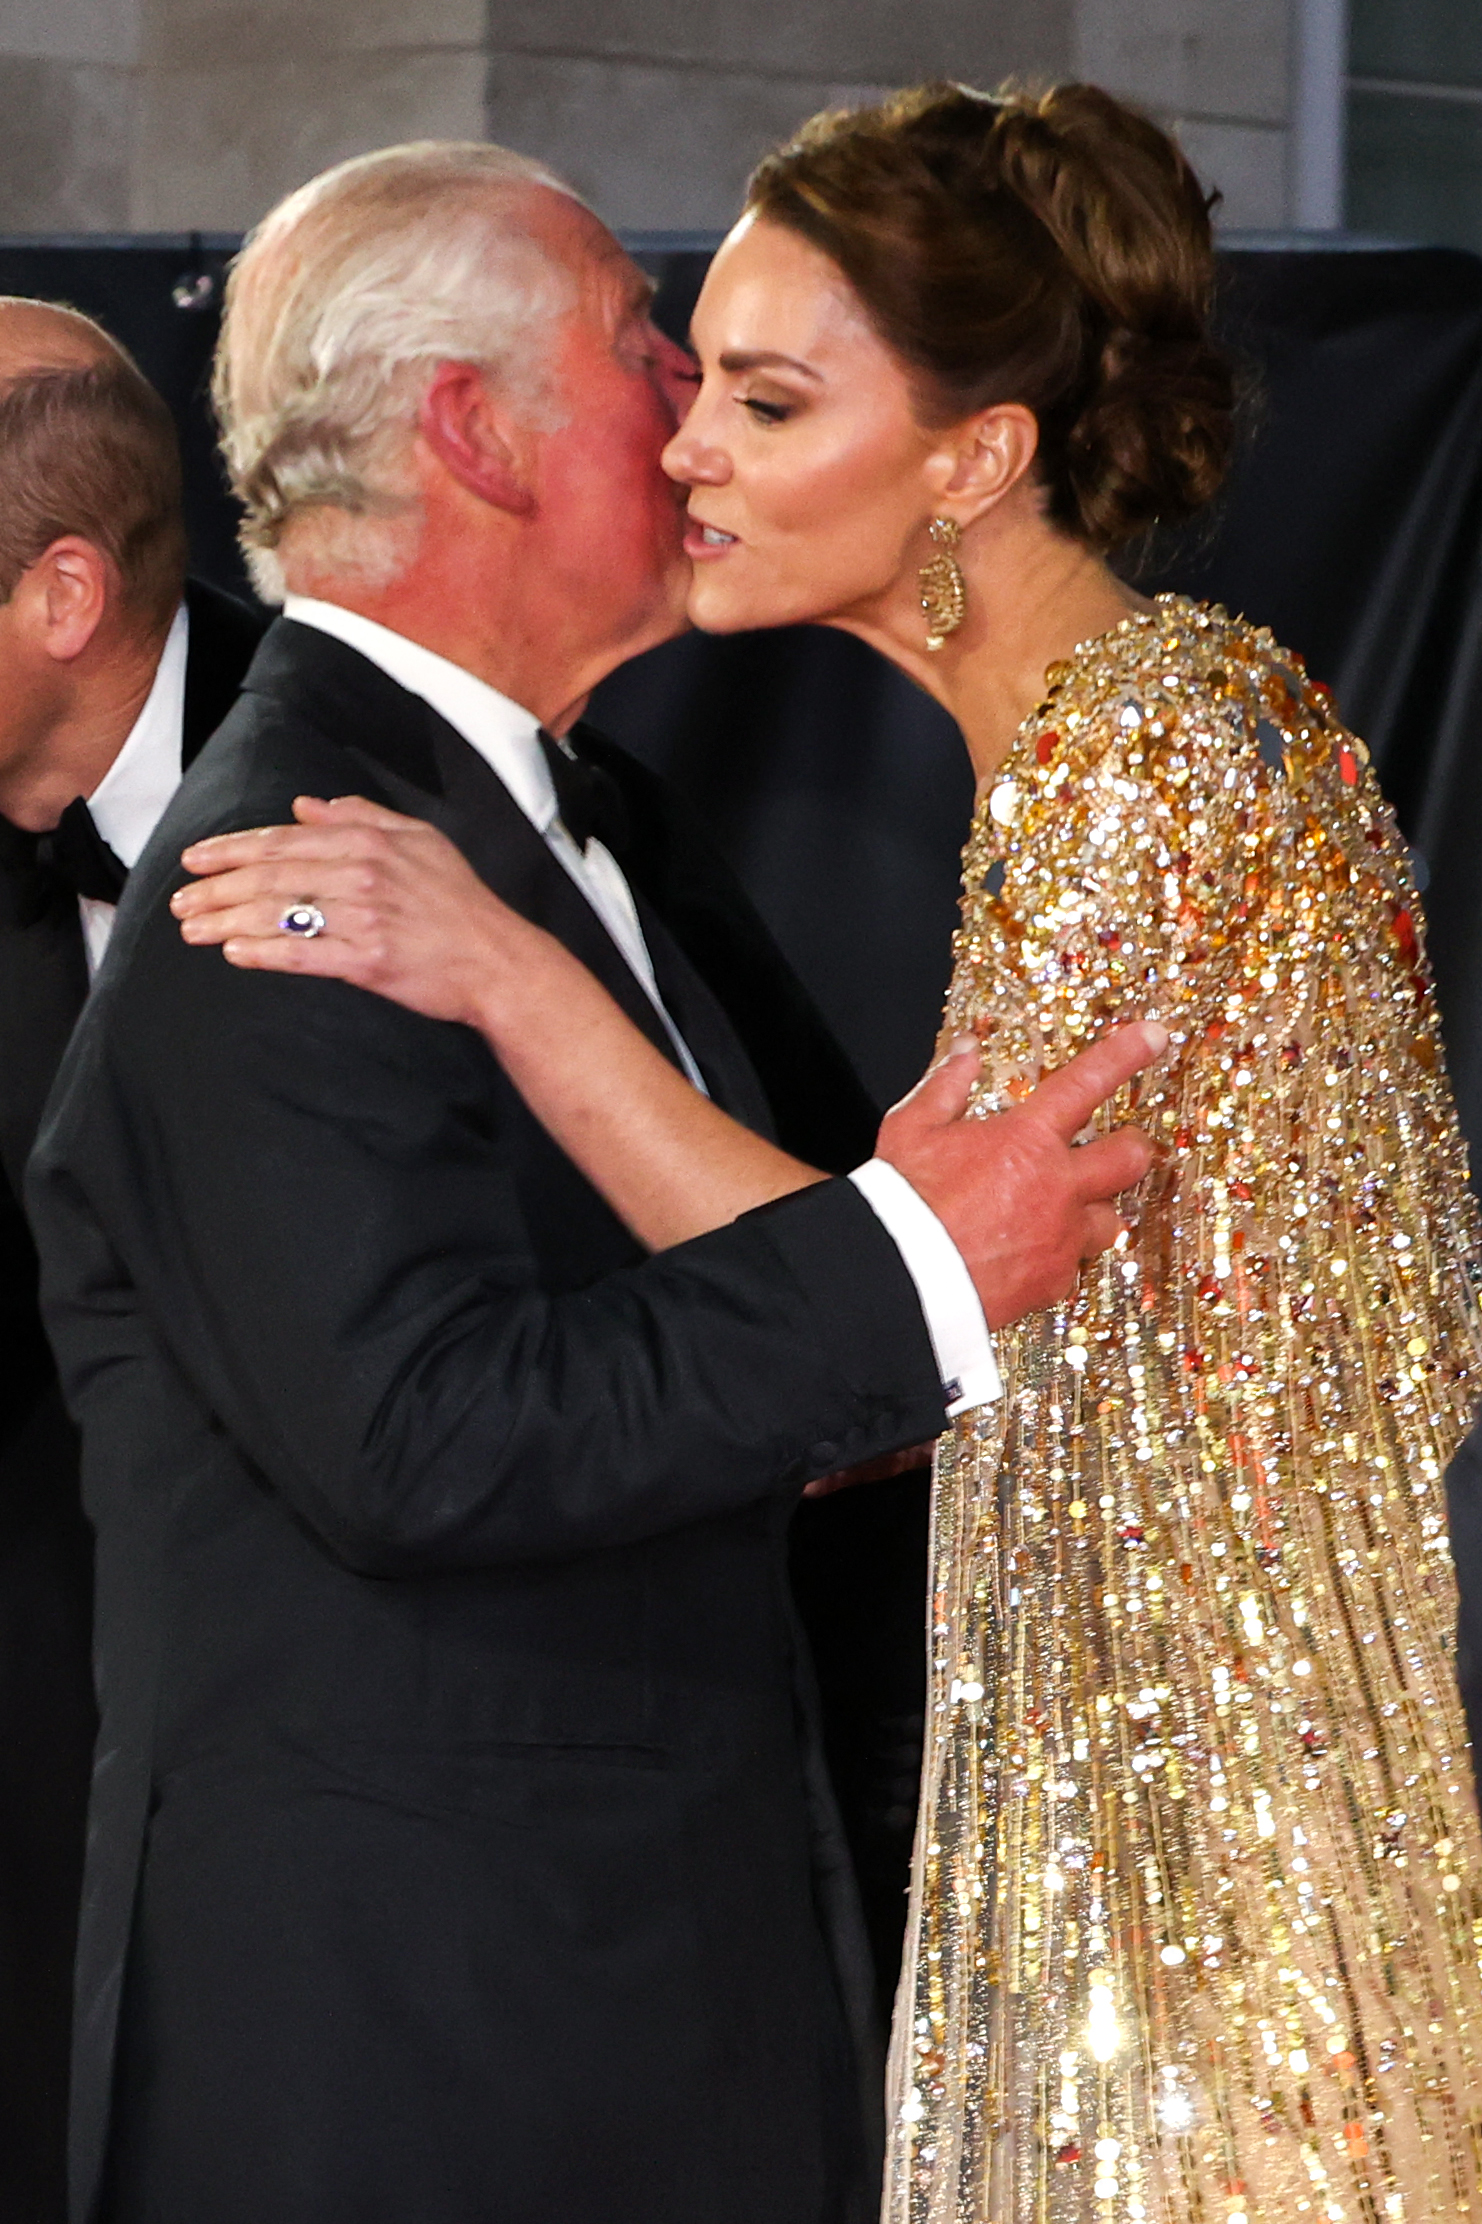 King Charles III kisses the Princess of Wales Kate Middleton at the premiere of the James Bond 007 film "No Time to Die" at the Royal Albert Hall in west London on September 28, 2021. | Source: Getty Images